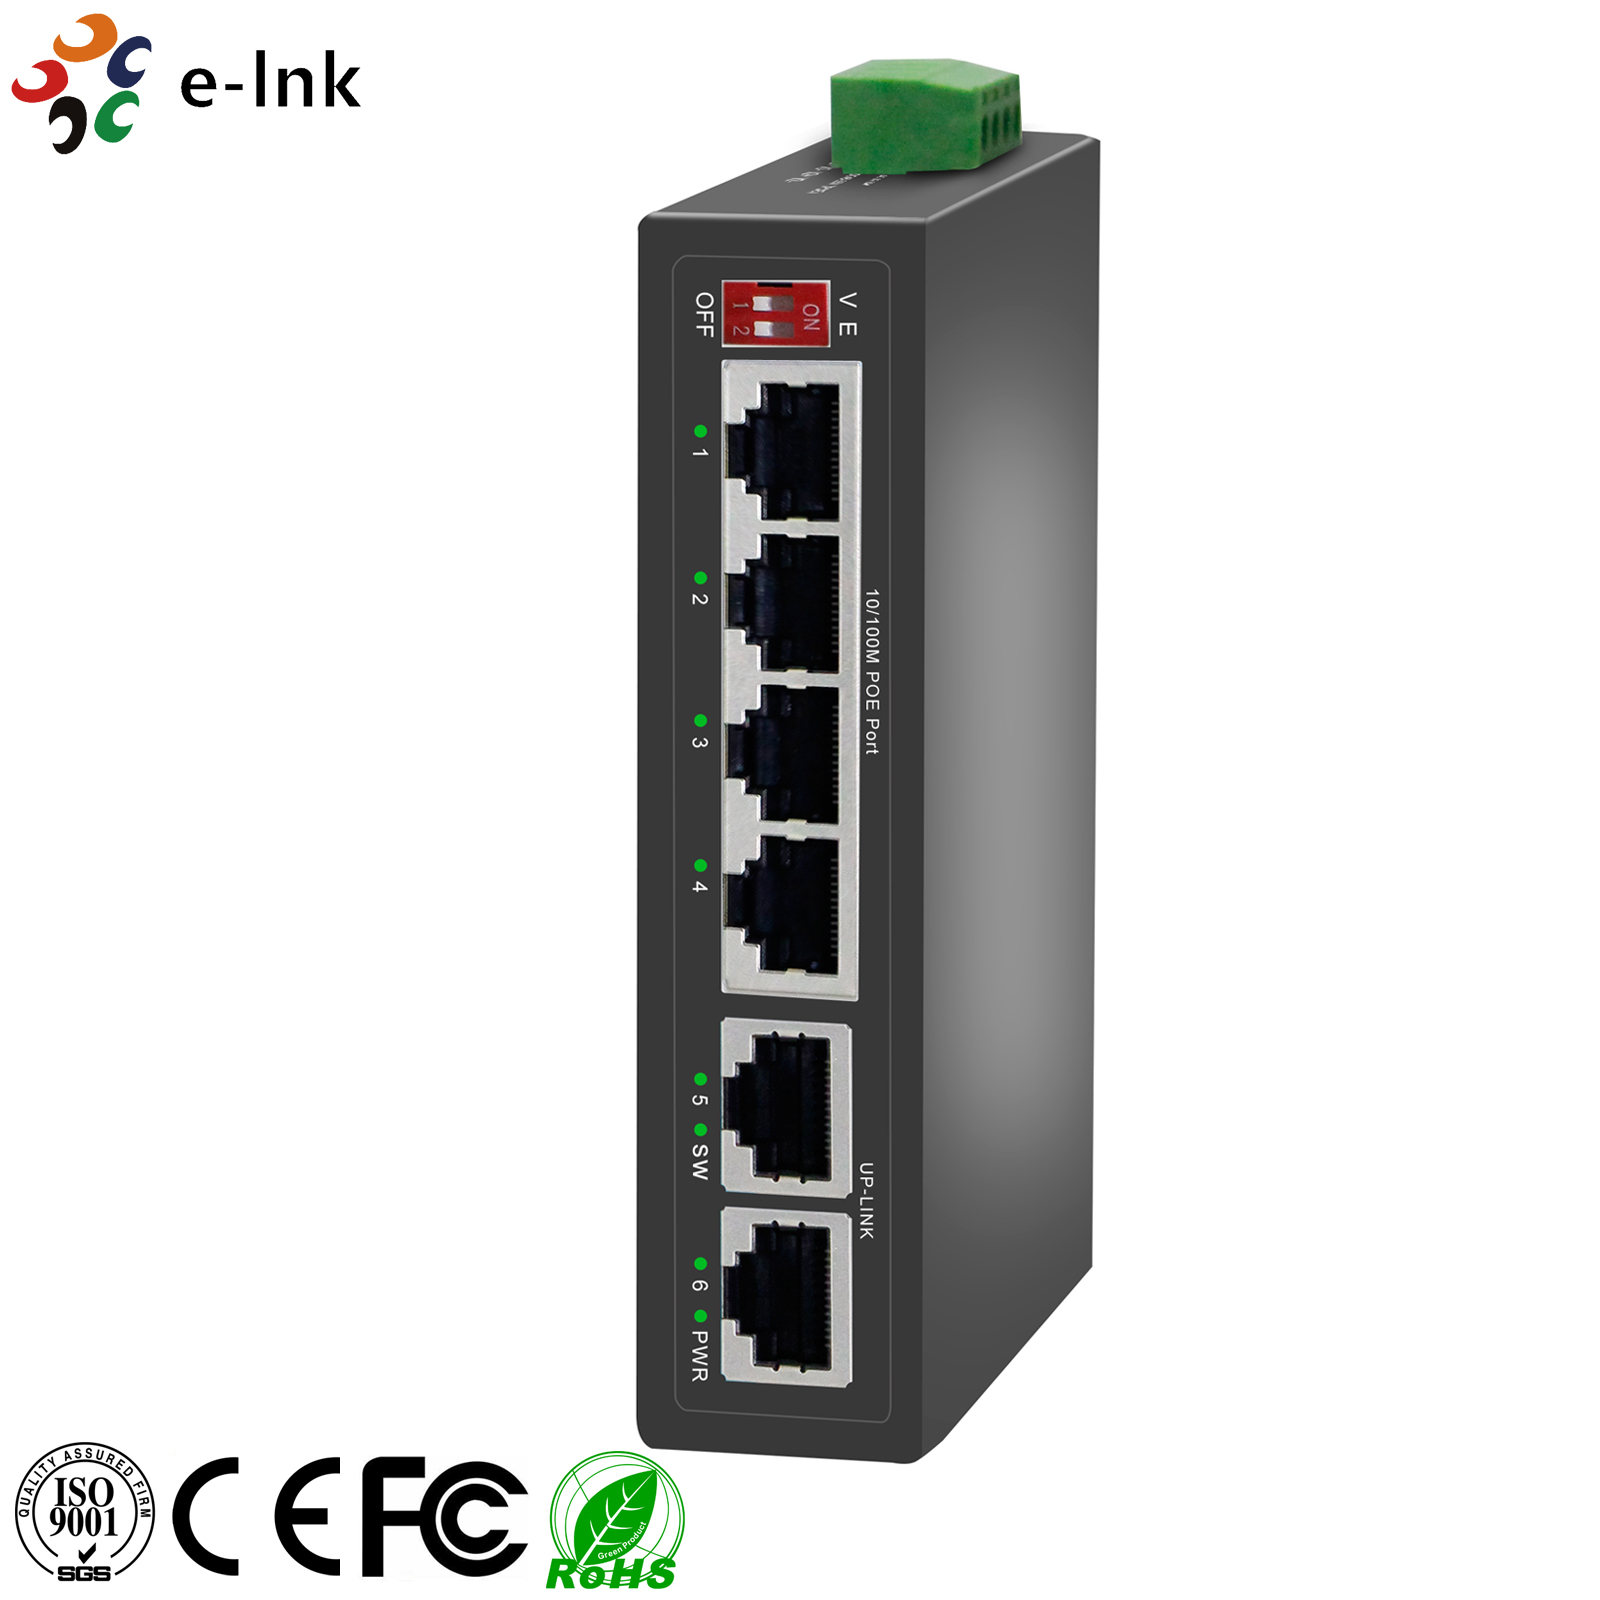 4 ports 10/100Mbps 250 Meter Industrial PoE Switch with 2 Uplink ports